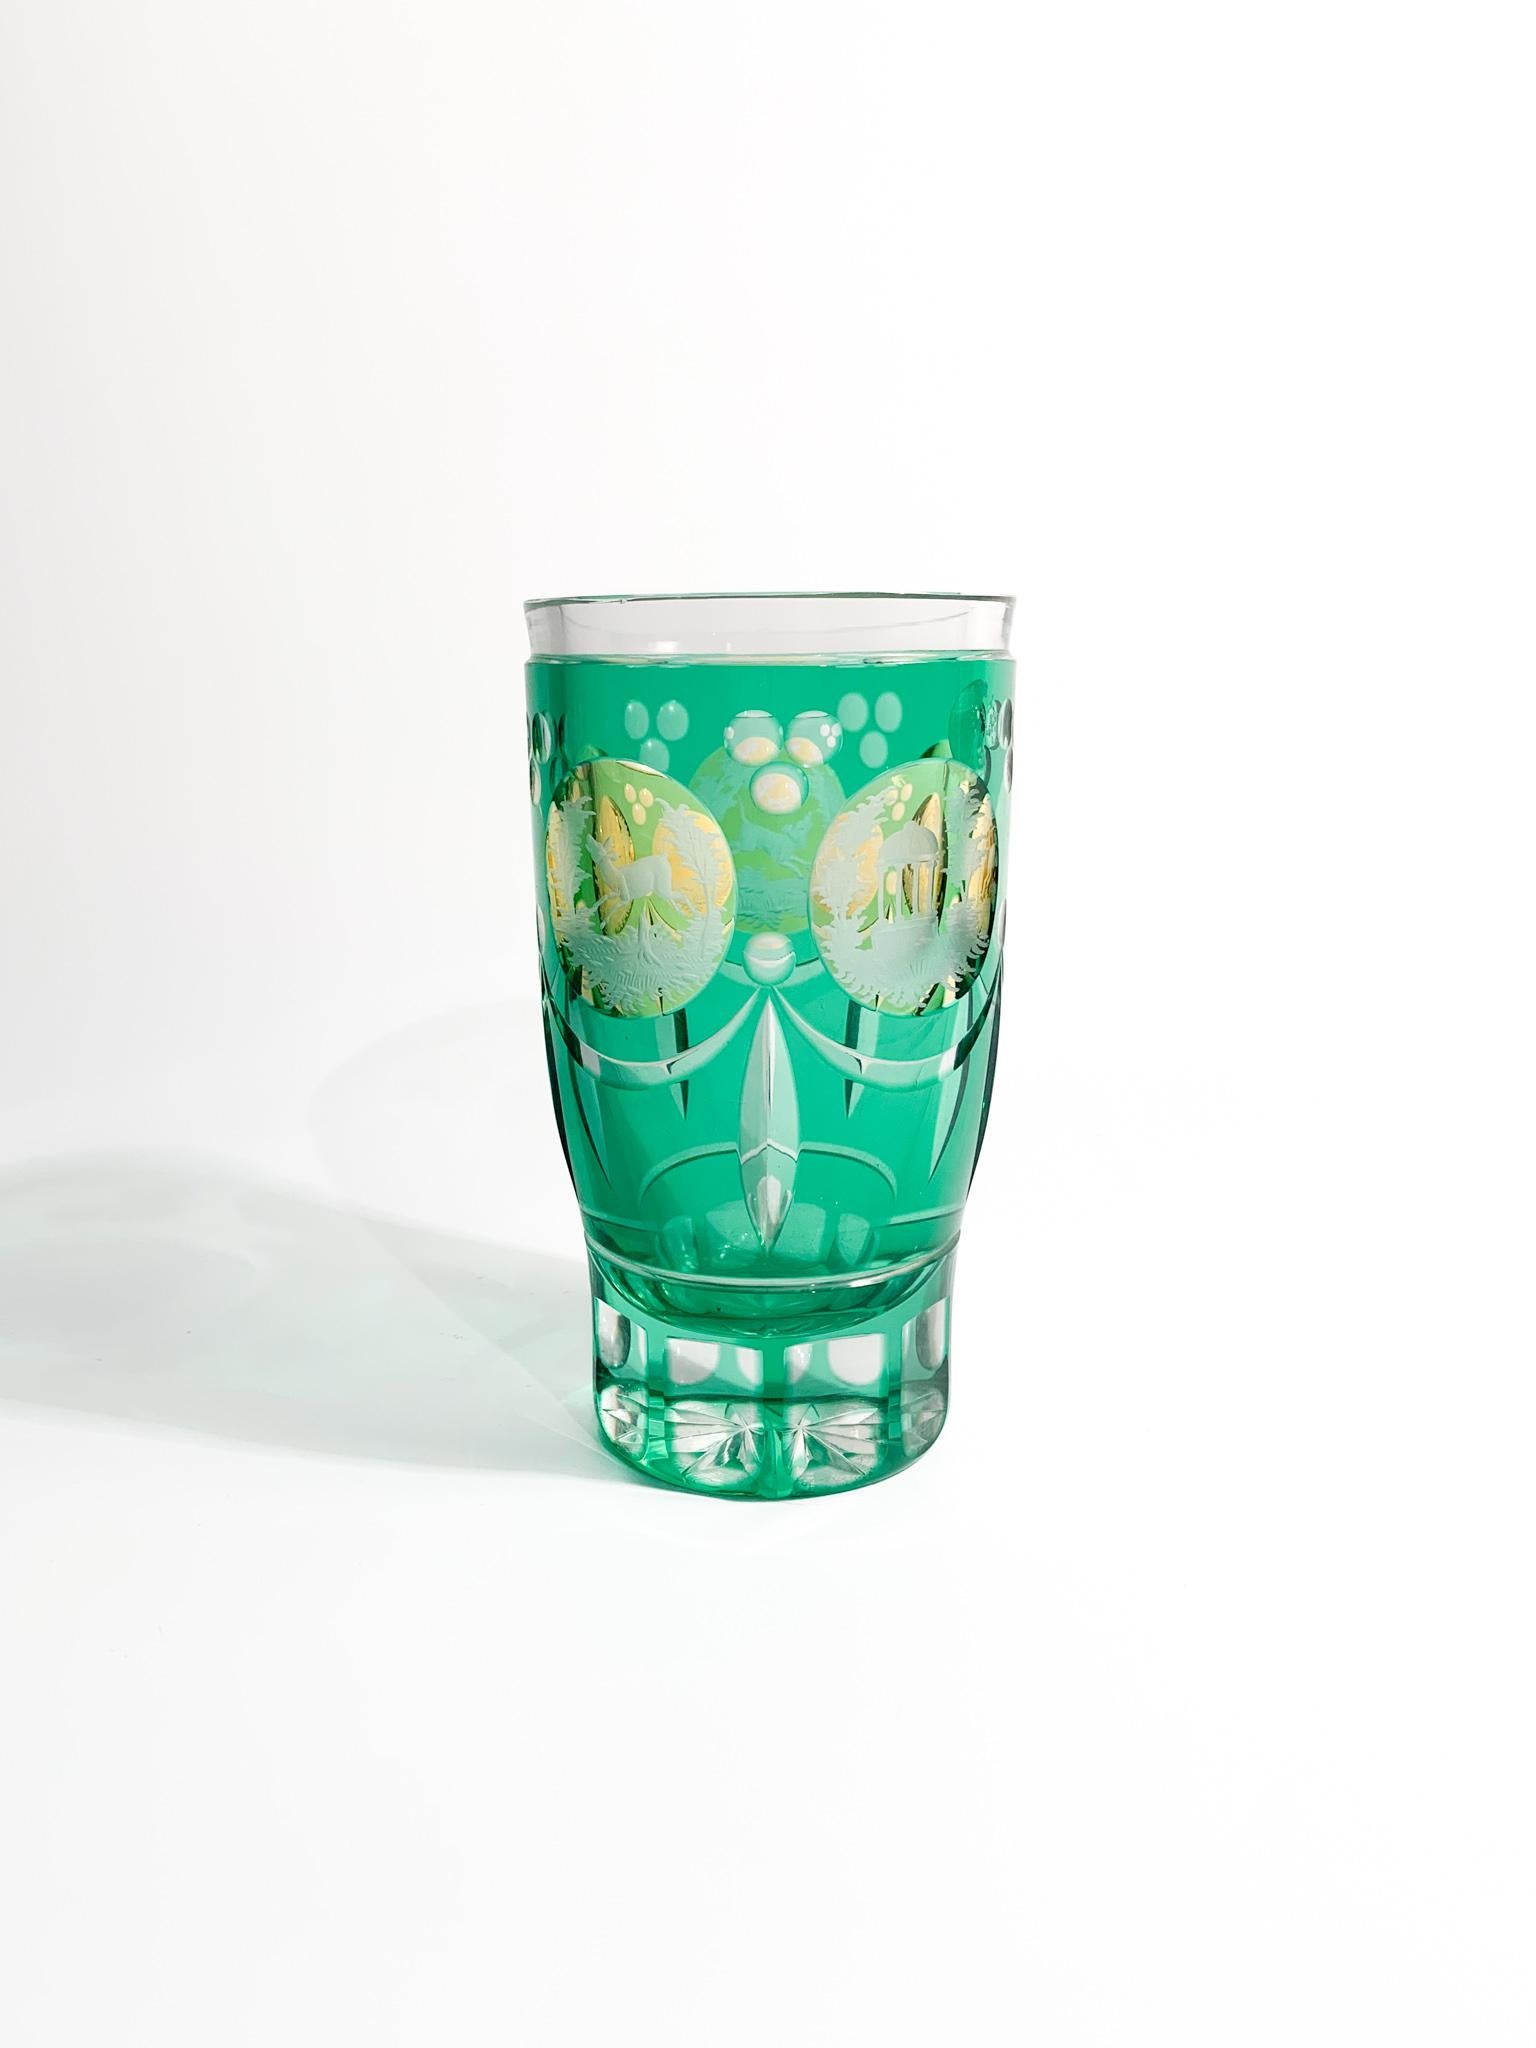 German Biedermeier Acid-decorated Green and Yellow Crystal Glass from the 19th Century